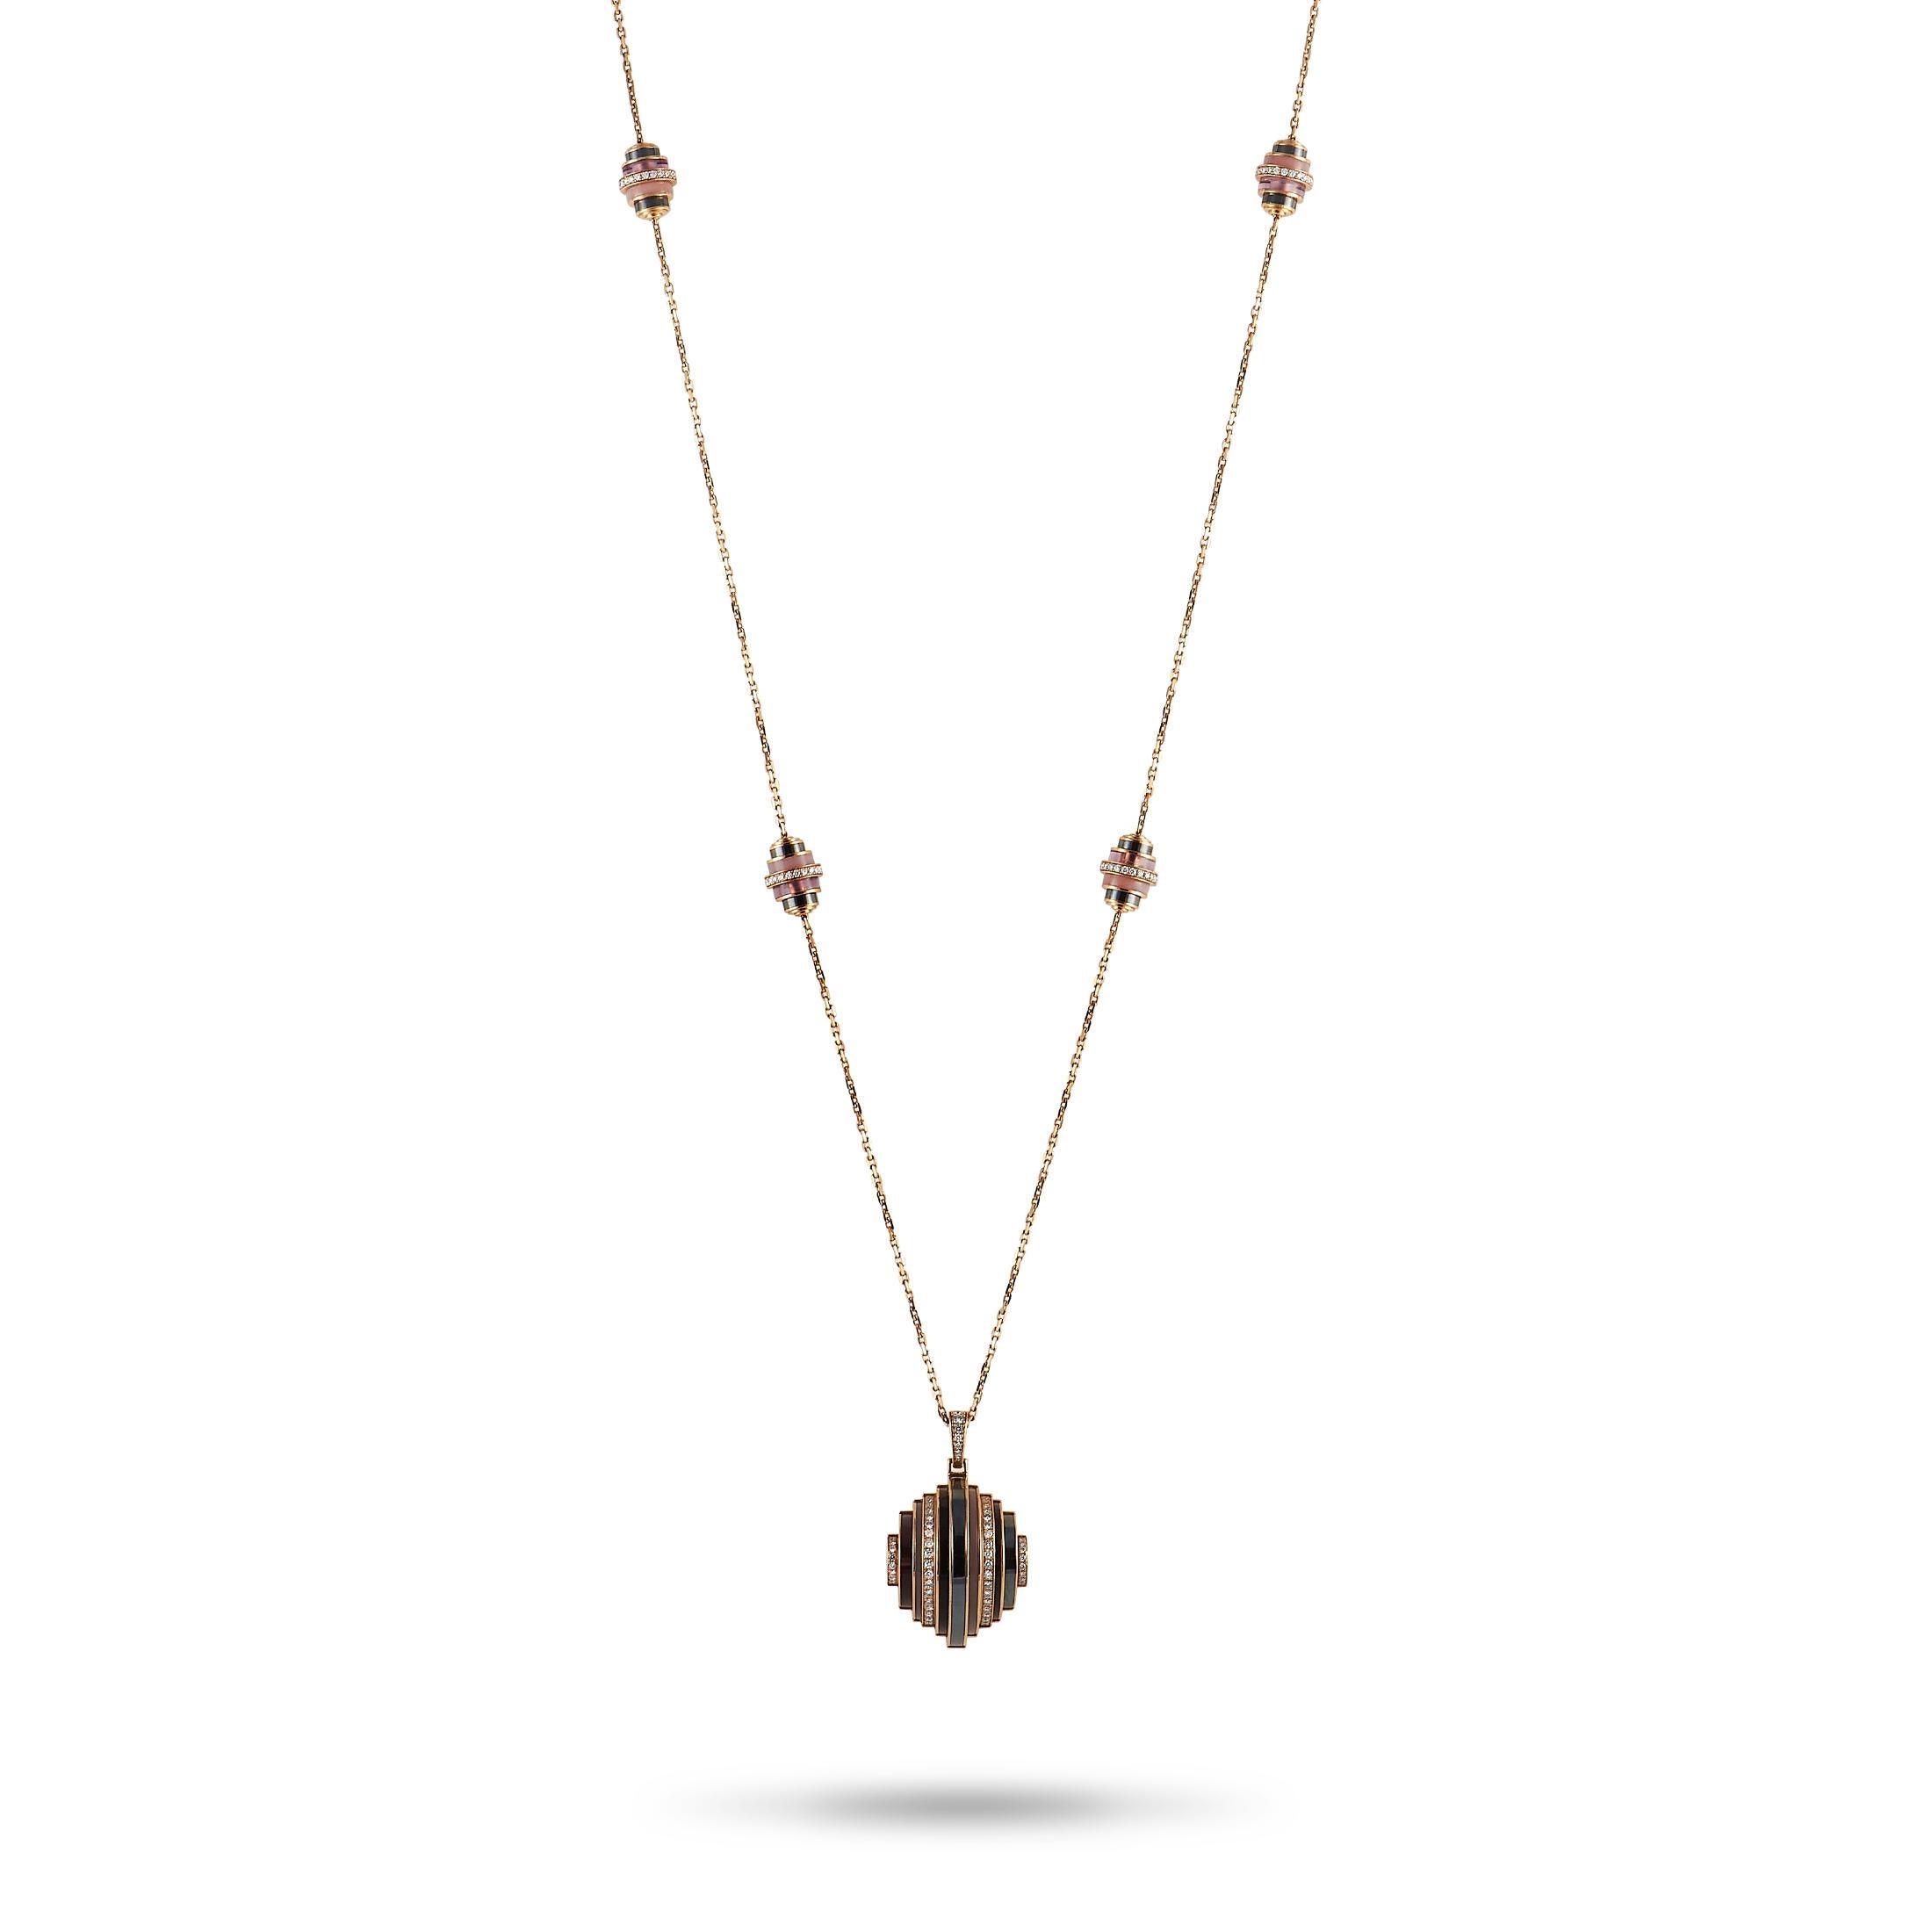 Breathtaking bands of color make this Cartier Collier Nouvelle Vague necklace uniquely elegant. This opulent accessory features an 18K Rose Gold chain measuring 32” long – suspended at the center, you’ll find a pendant measuring 1.65” long and 1.0”